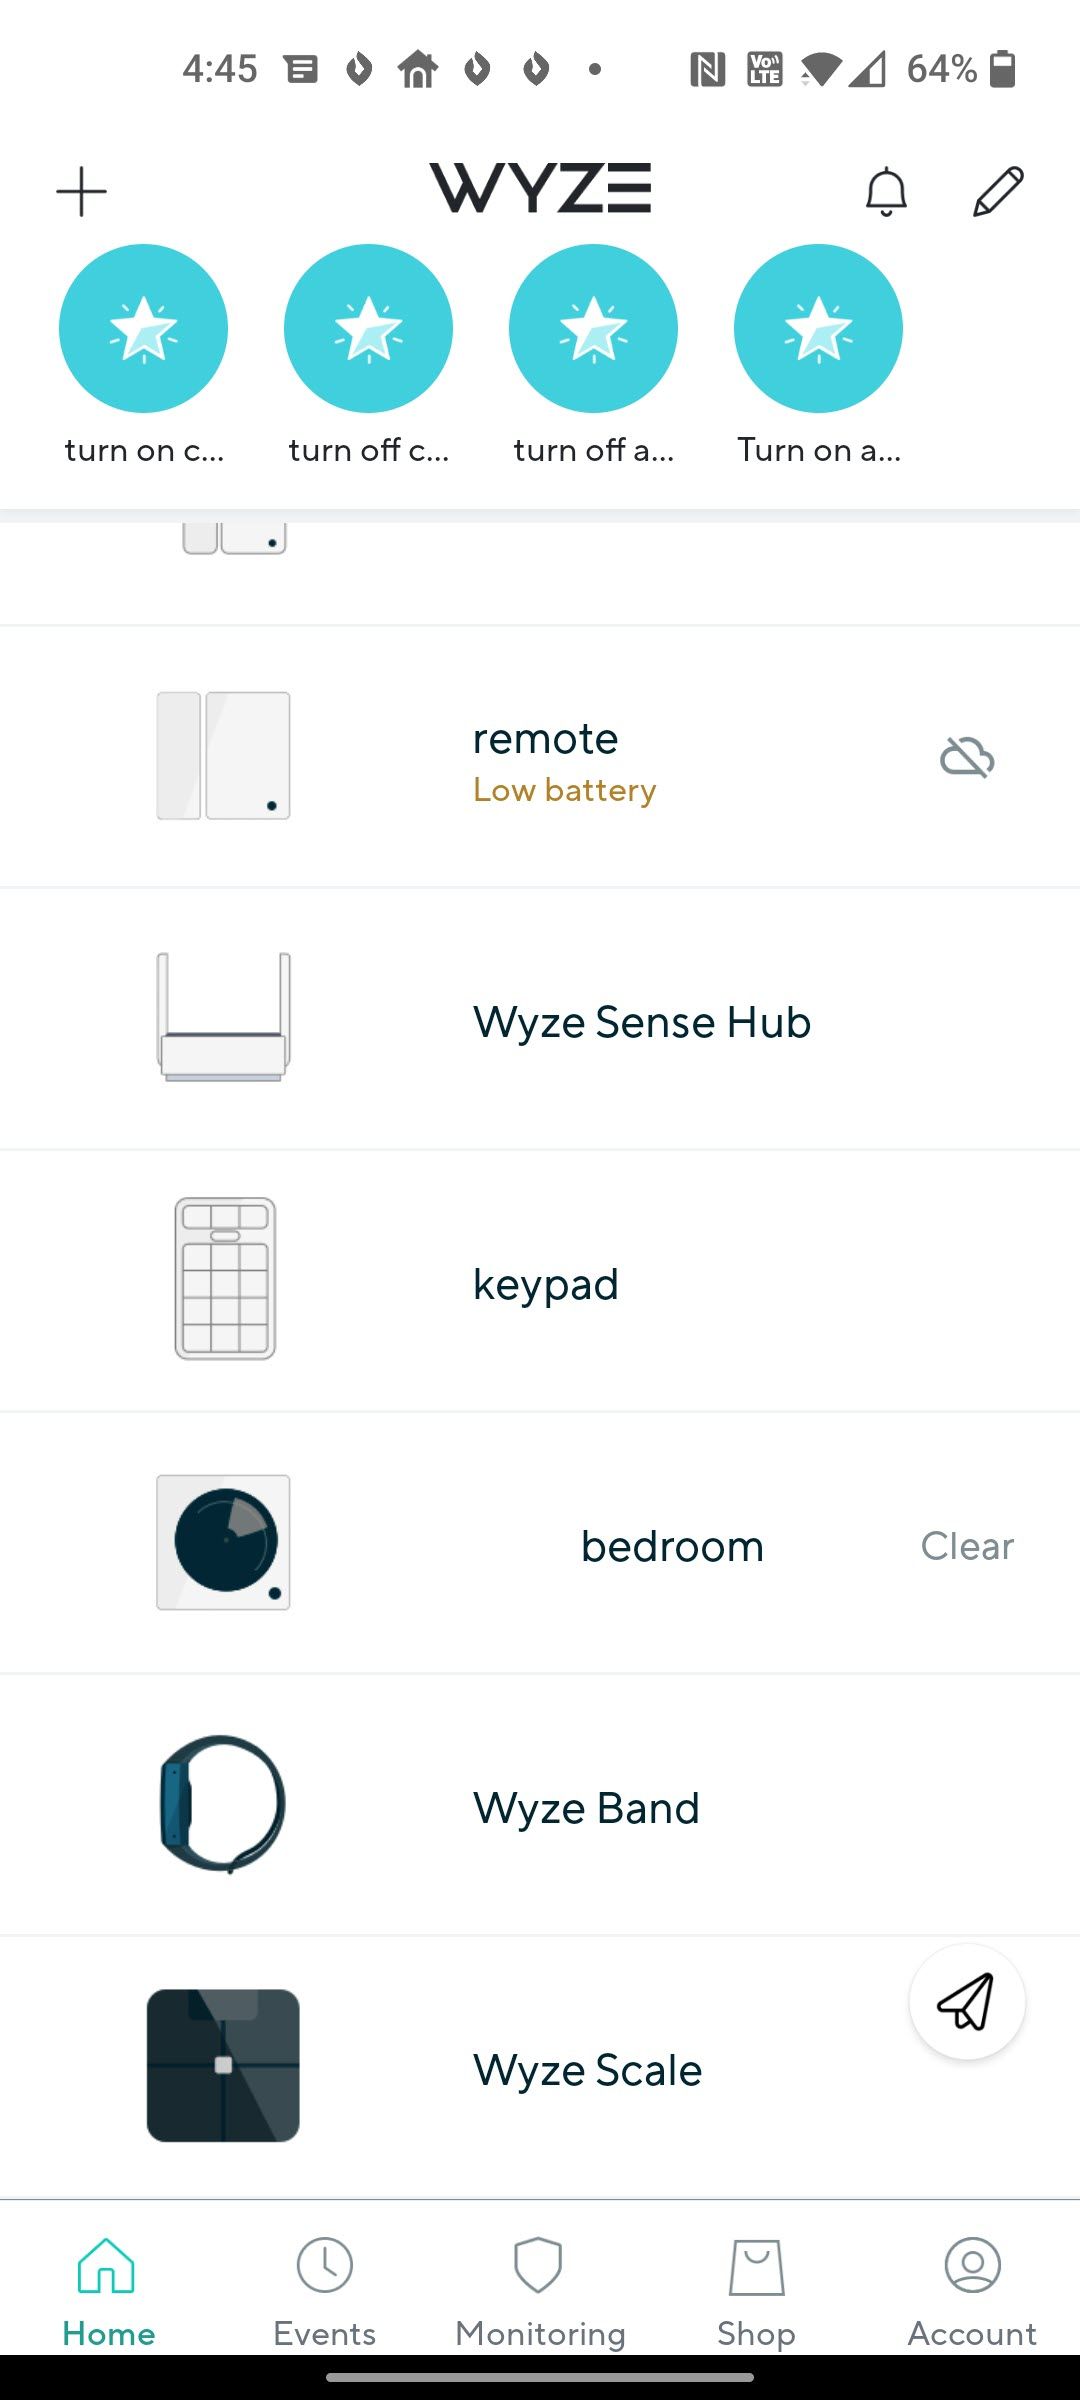 Wyze's Home Monitoring views.